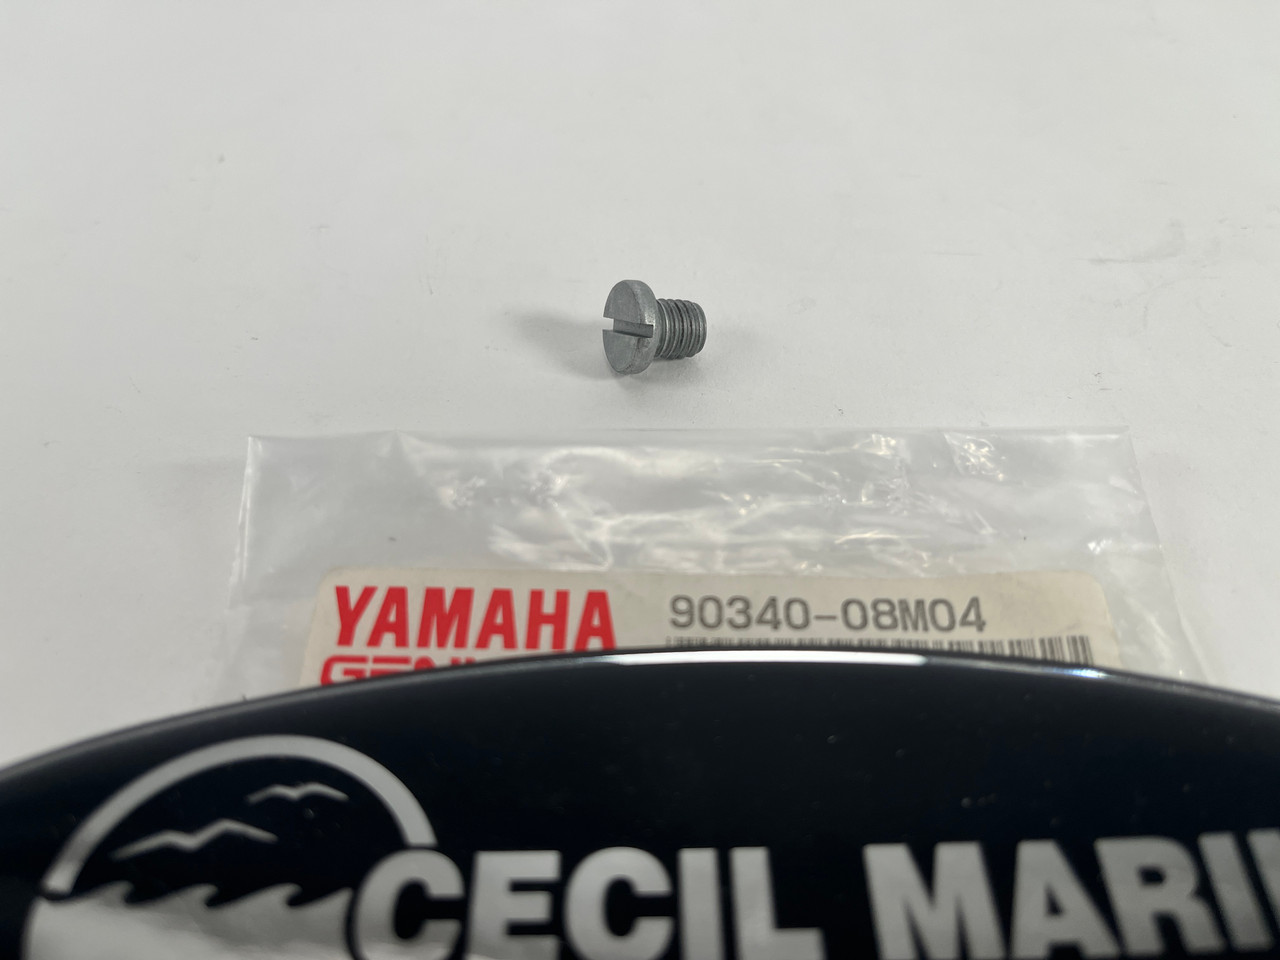 $10.99* GENUINE YAMAHA no tax* 90340-08002-00 90340-08M04-00 *In Stock & Ready To Ship